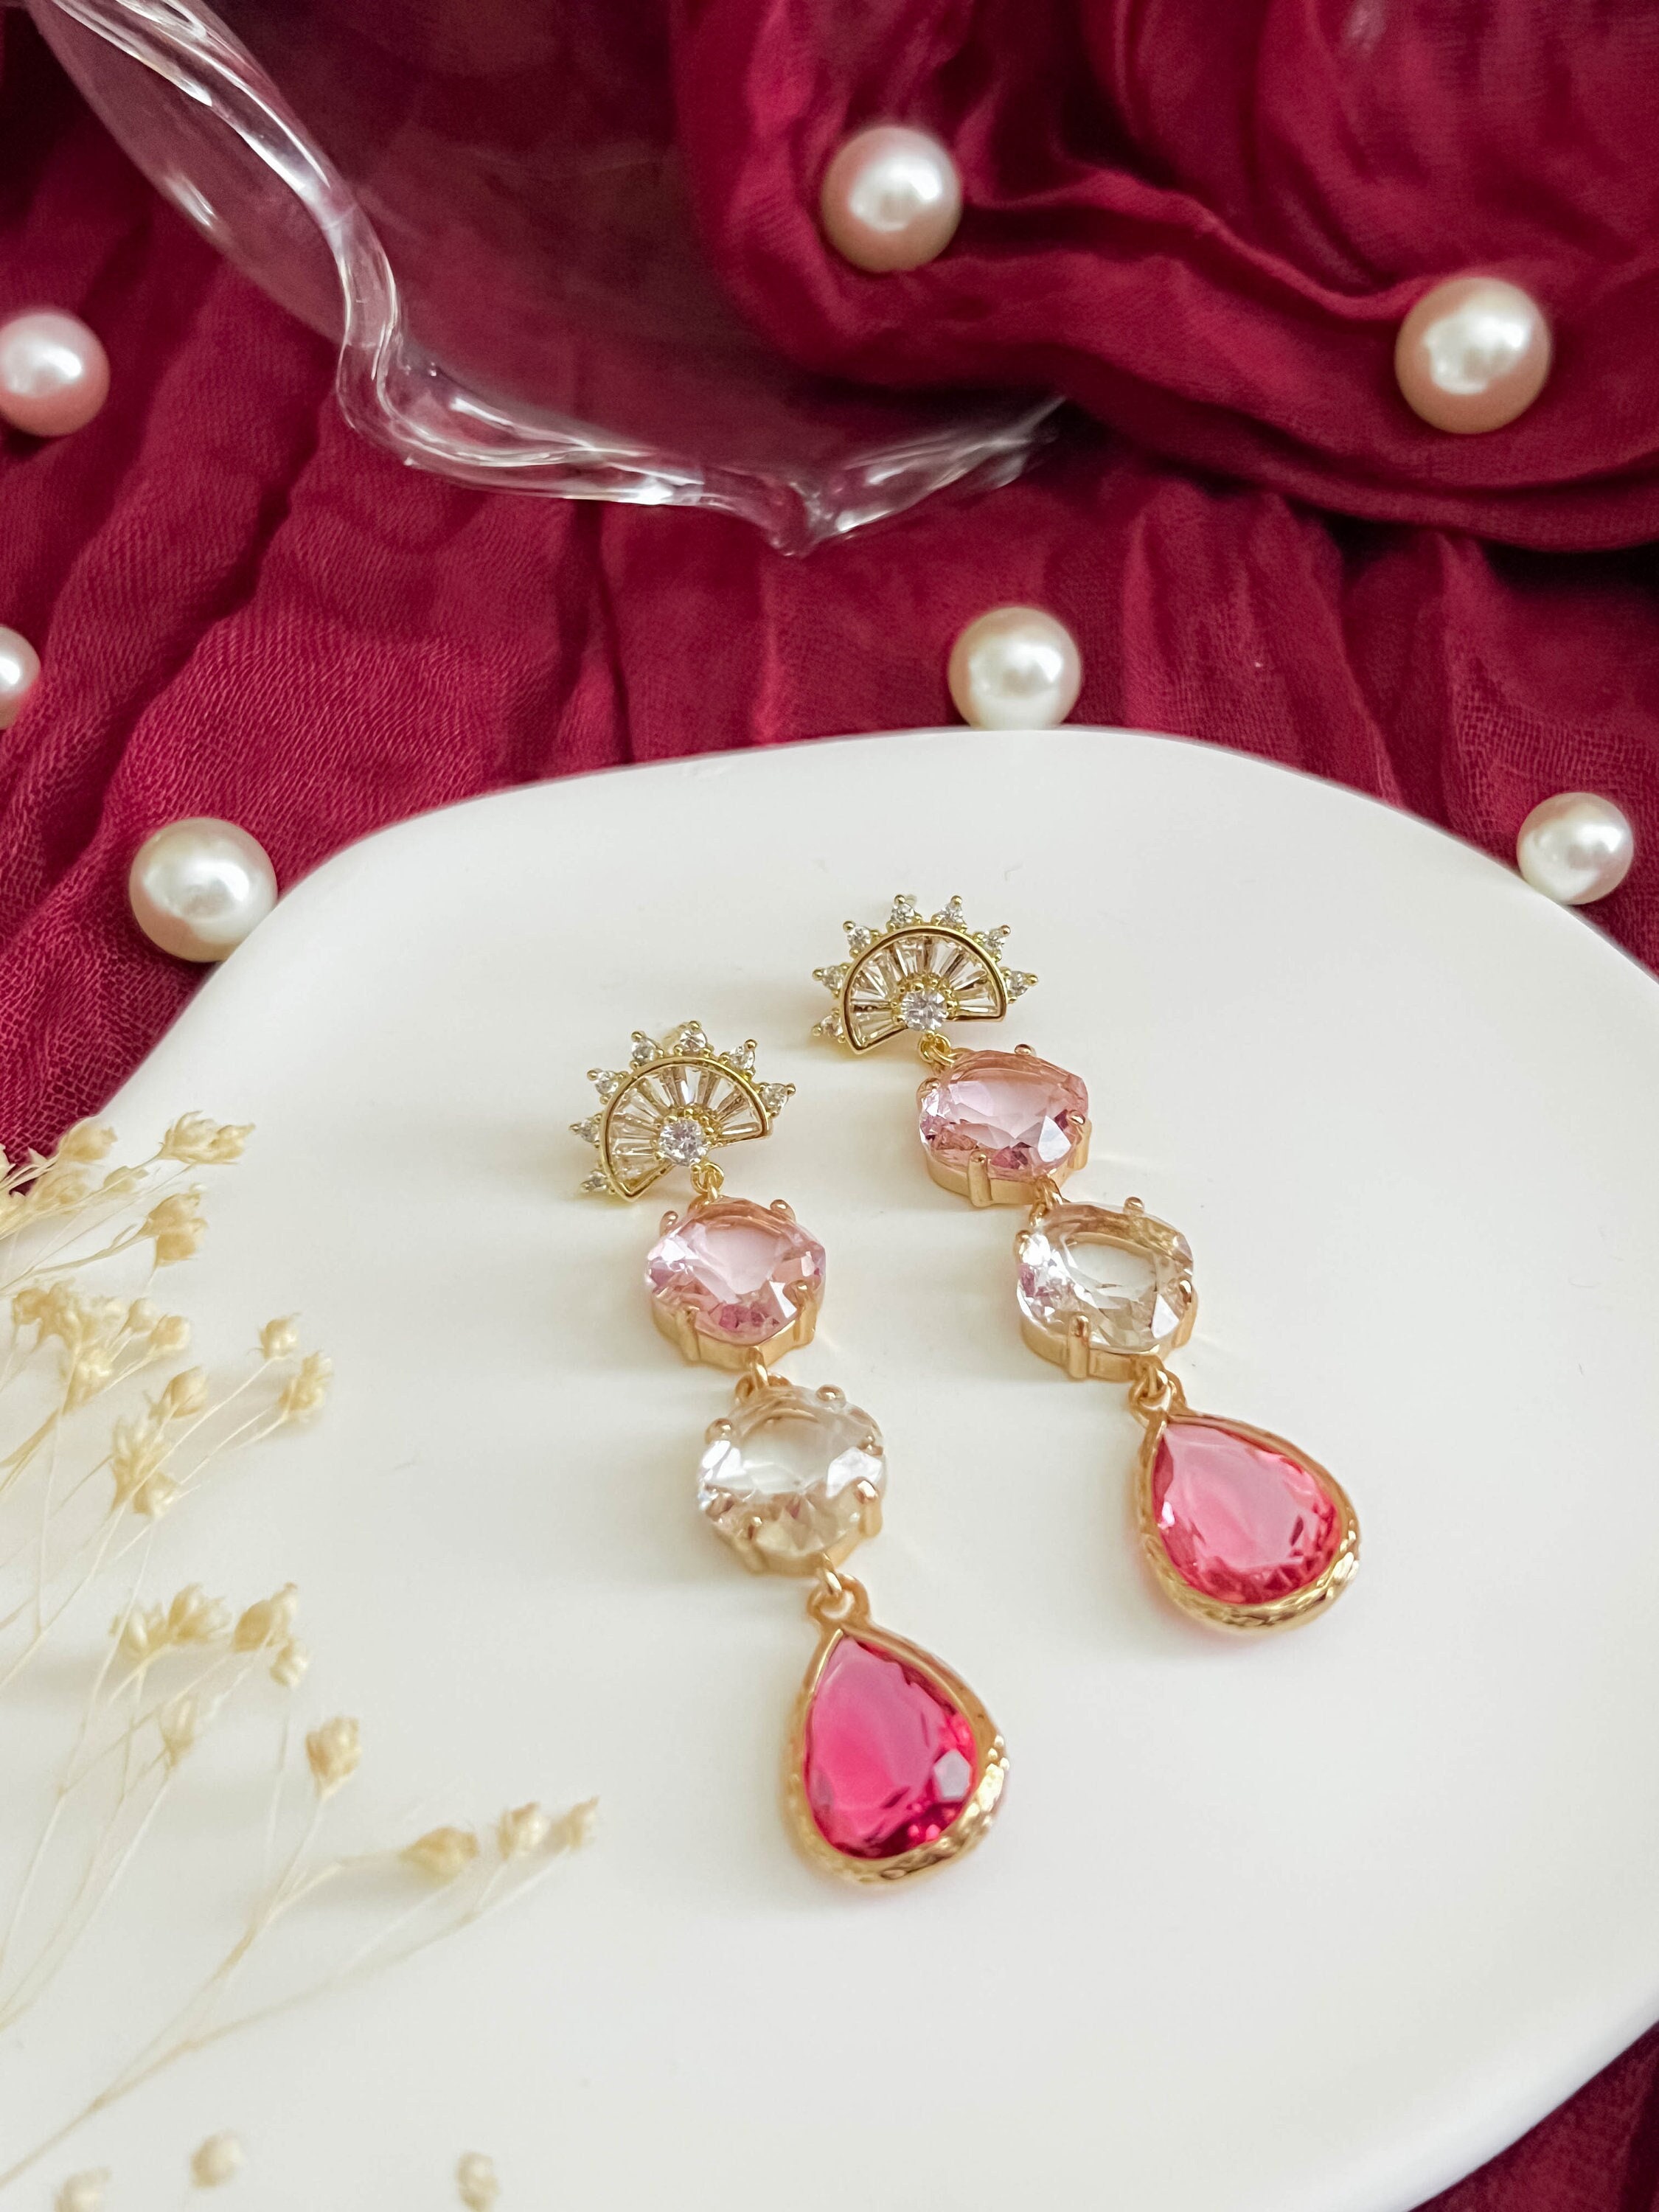 9 Carat Red Gold Drop Earrings with Rose Quartz from Curteis